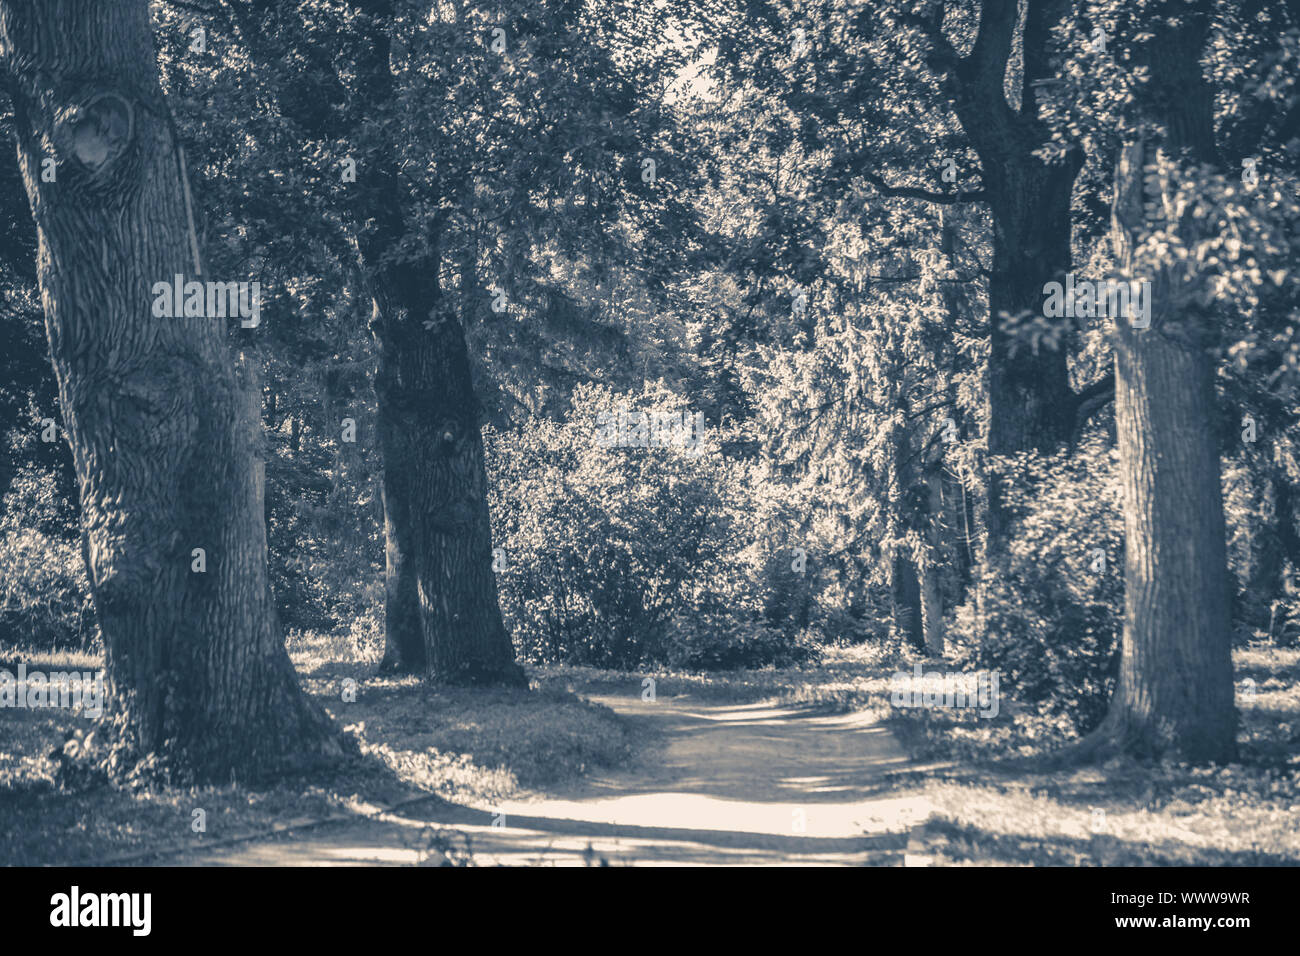 Old vintage photo. Forest park leaves road trees grass sunlight shadow Stock Photo